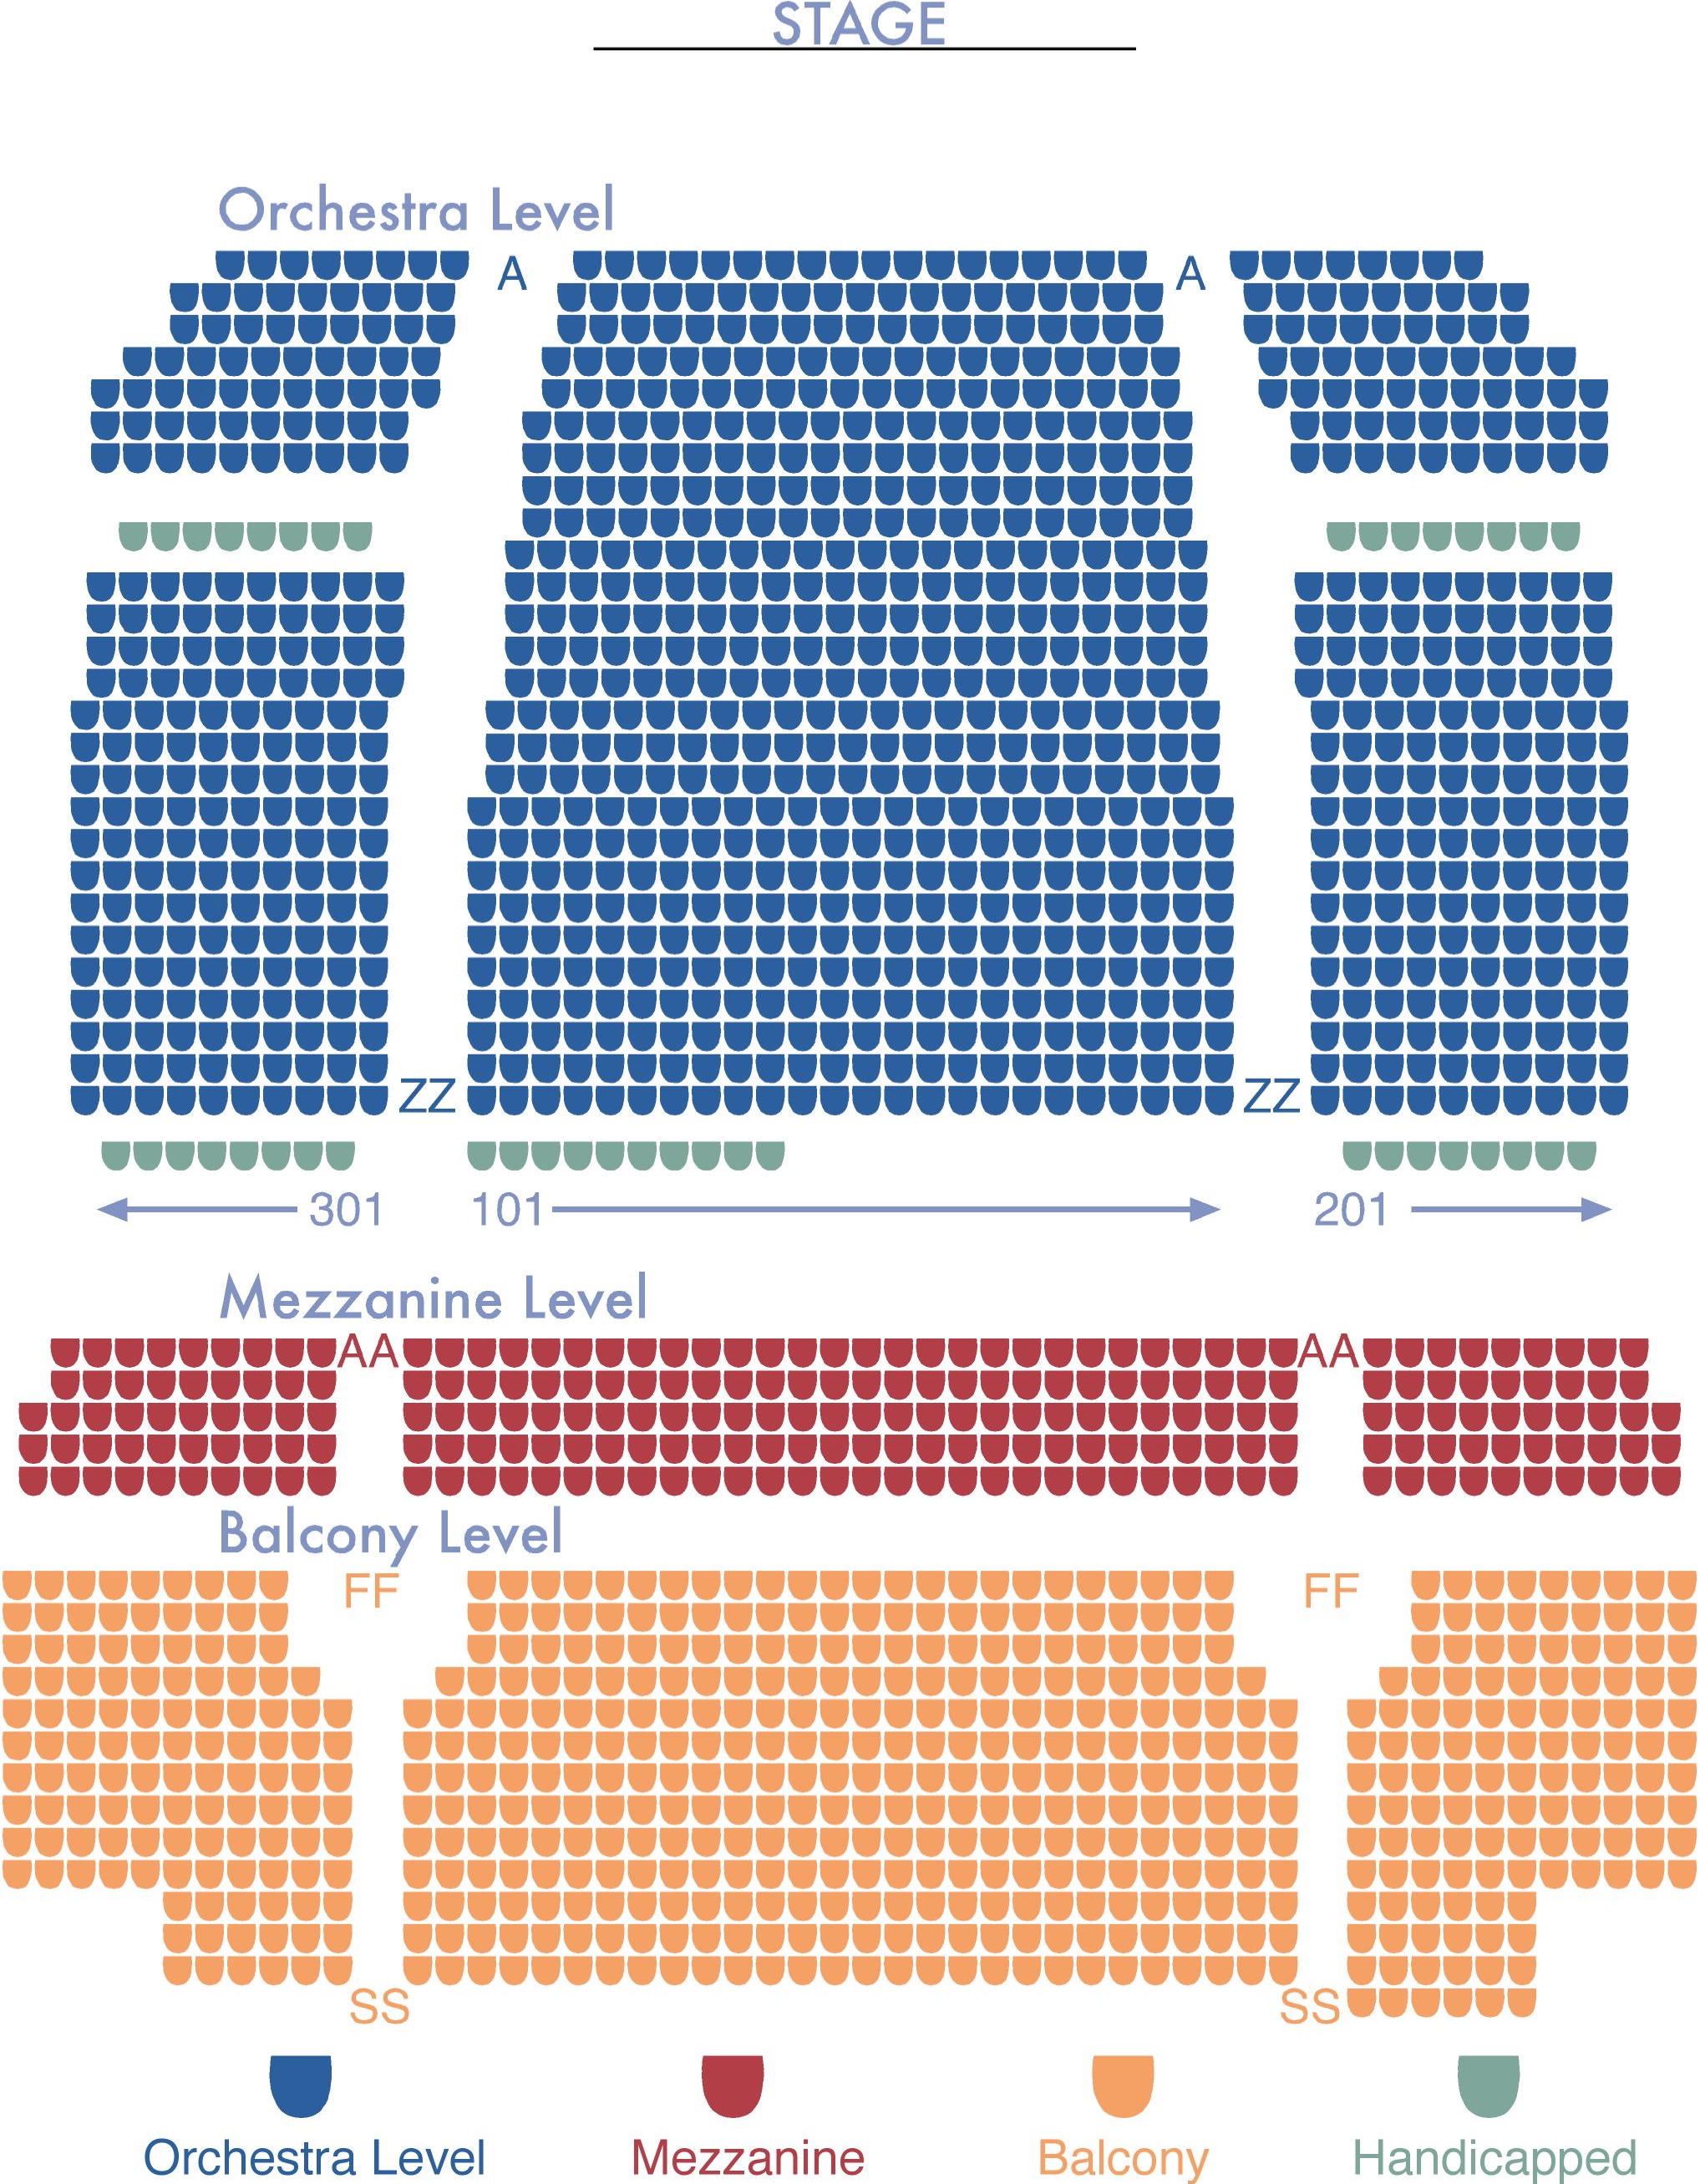 Wisepies Arena Seating Chart